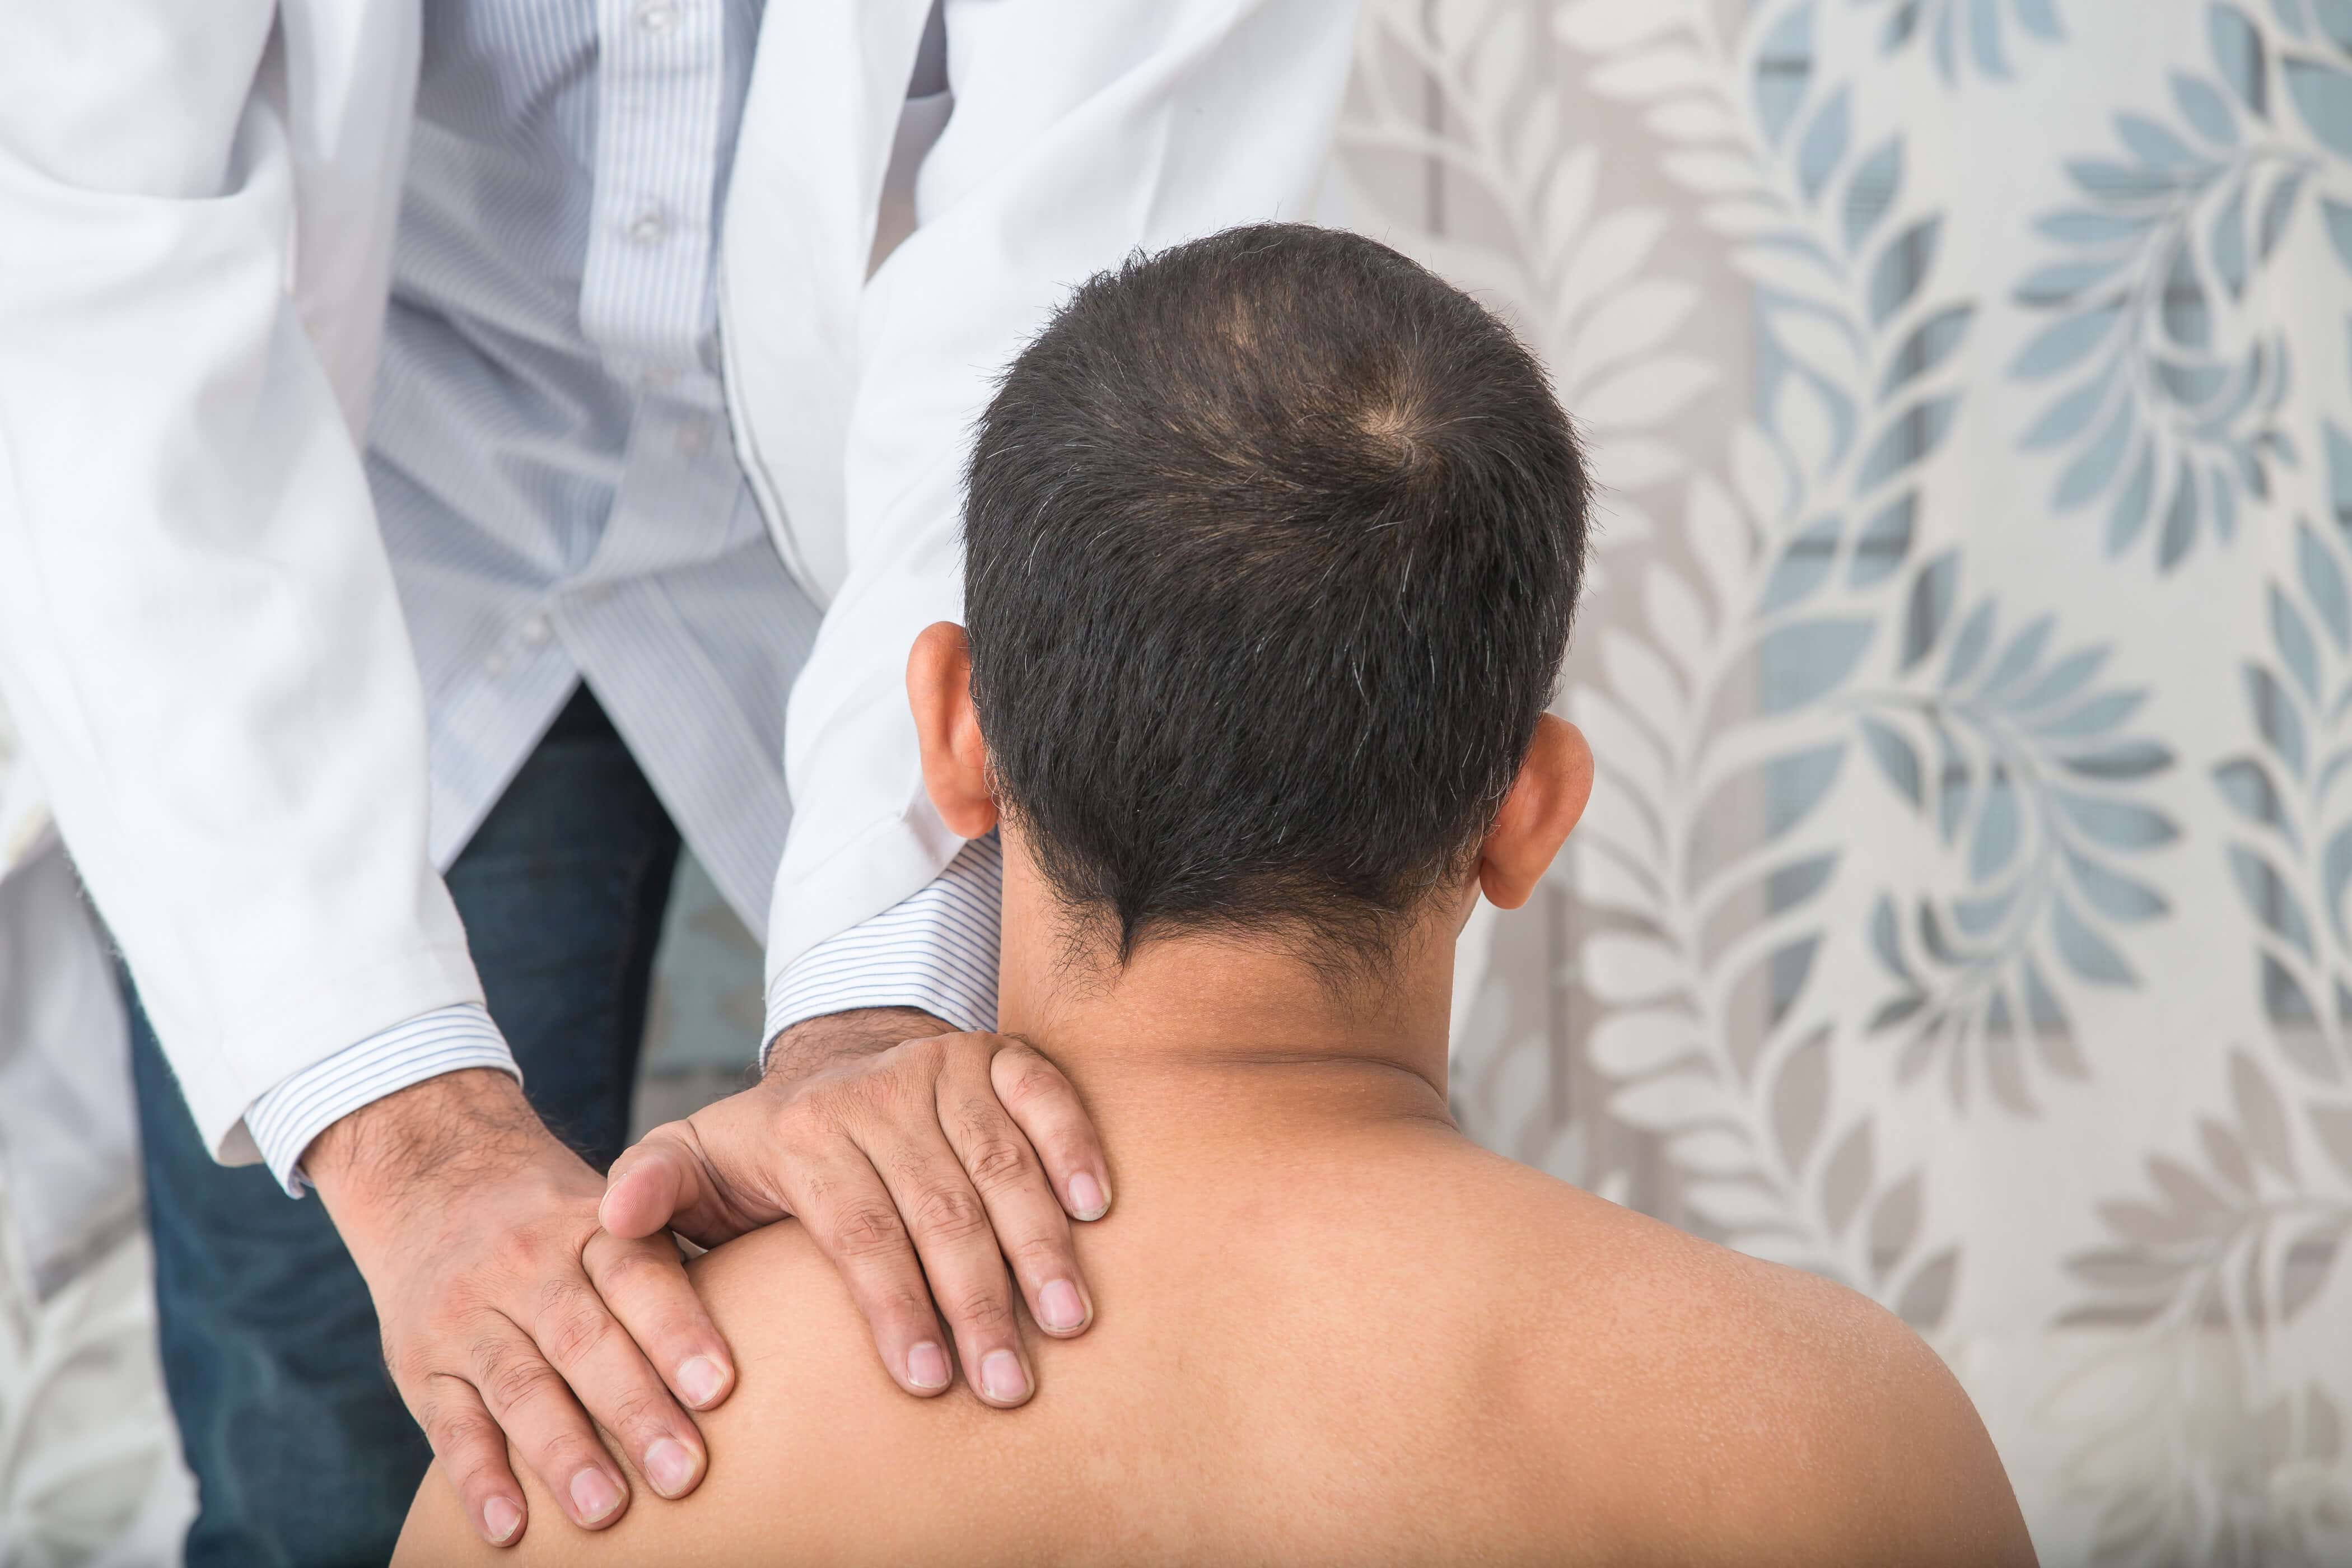 A man receives shoulder treatment from a doctor after an accident at work 